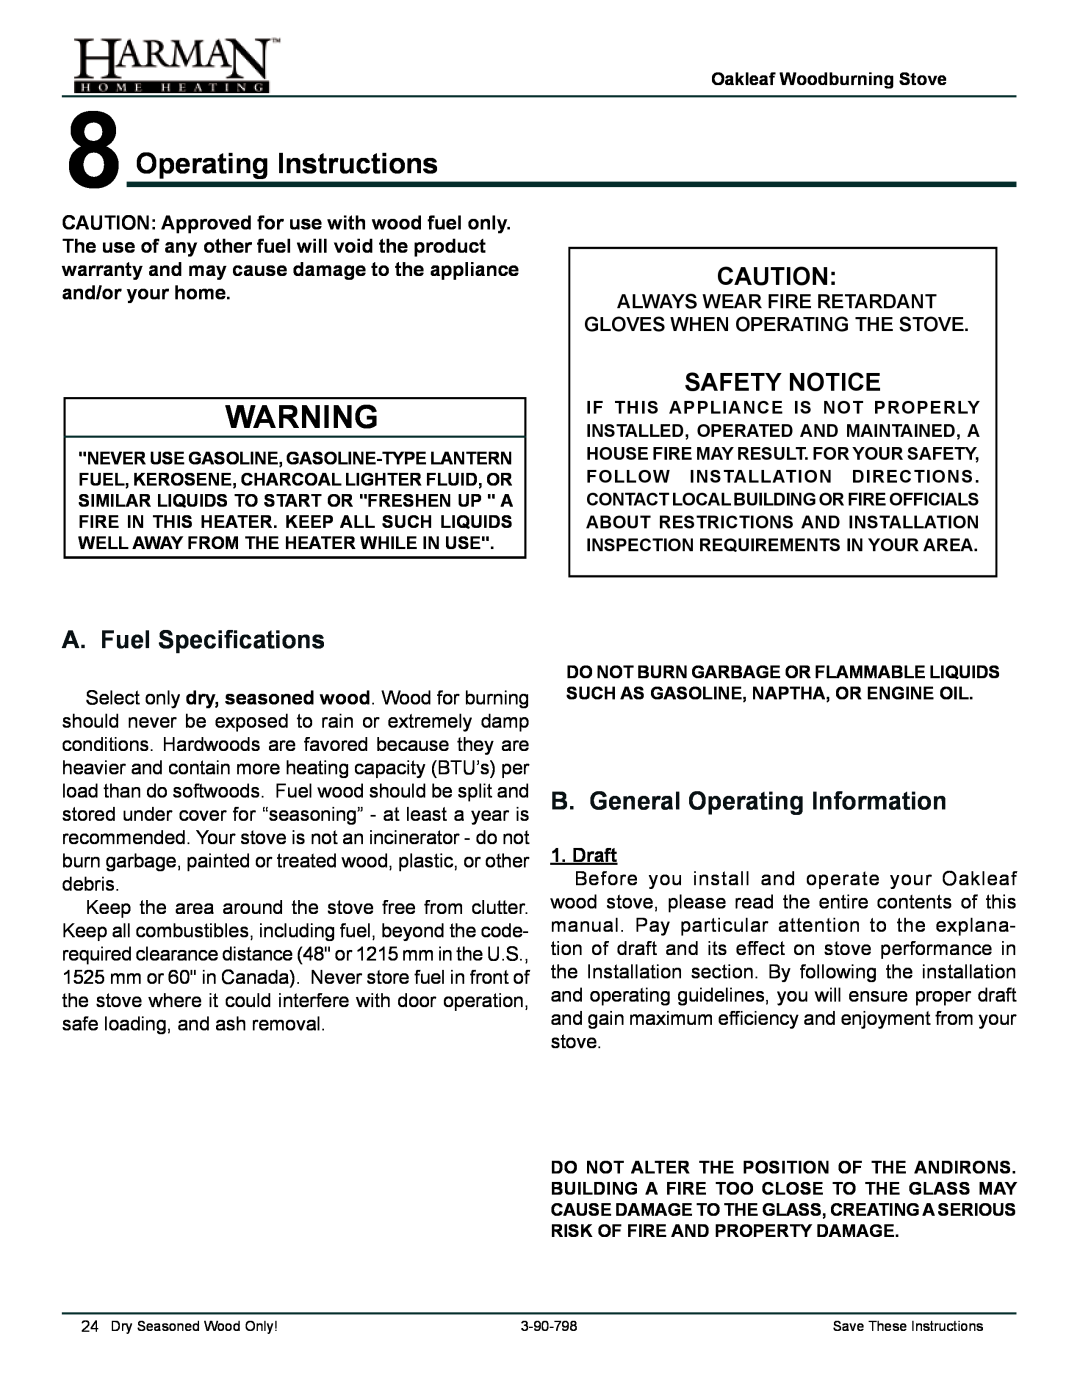 Harman Stove Company 1-90-797000 manual 8Operating Instructions, Safety Notice, A. Fuel Specifications, Draft 